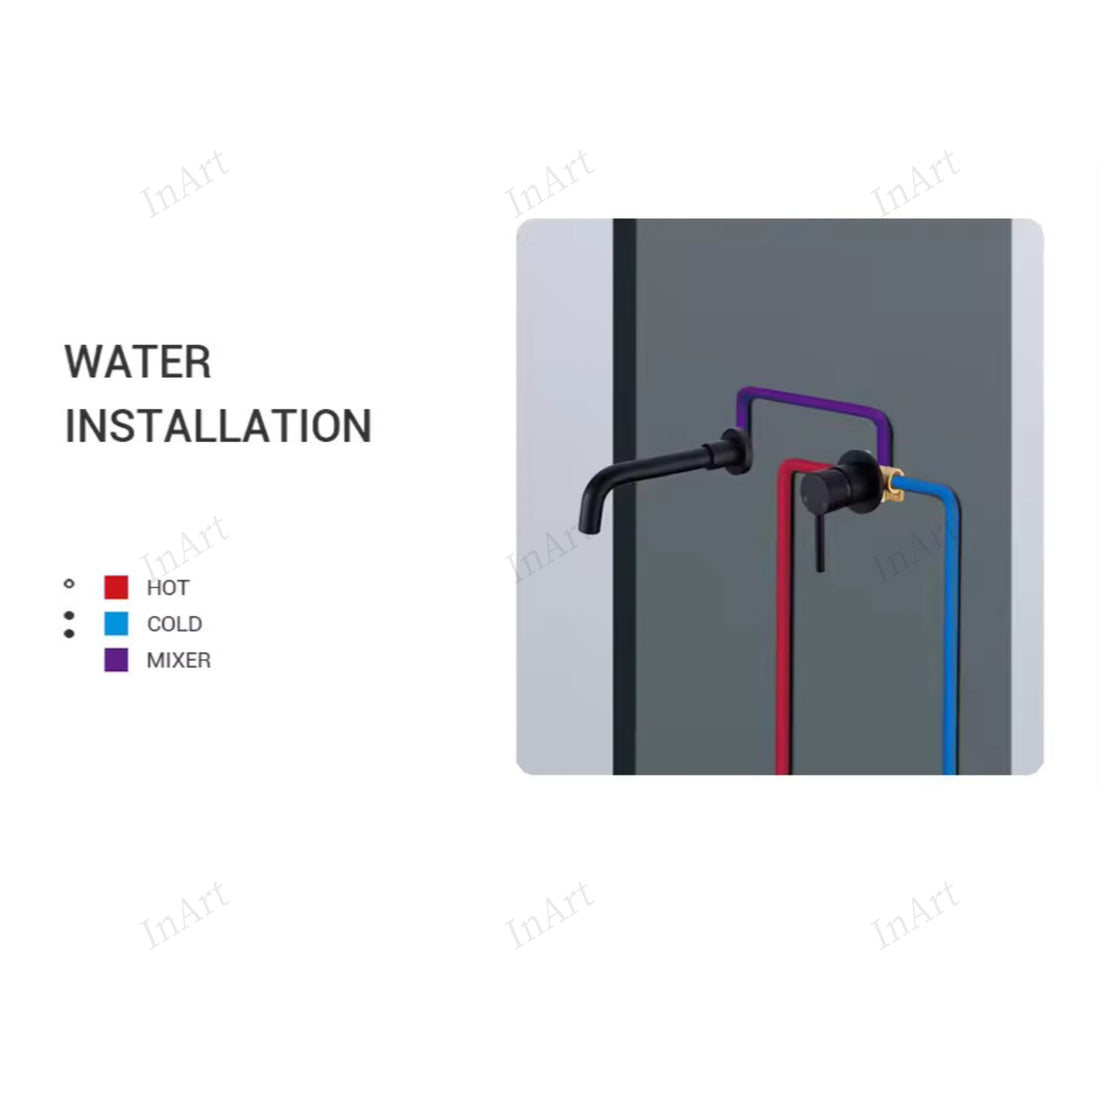 InArt Waterfall Faucet Tap | Wall Mounted Brass Basin Mixer | Concealed Parts | Single Lever | Hot & Cold Water | Modern Design | Matt Black Finish WMF006